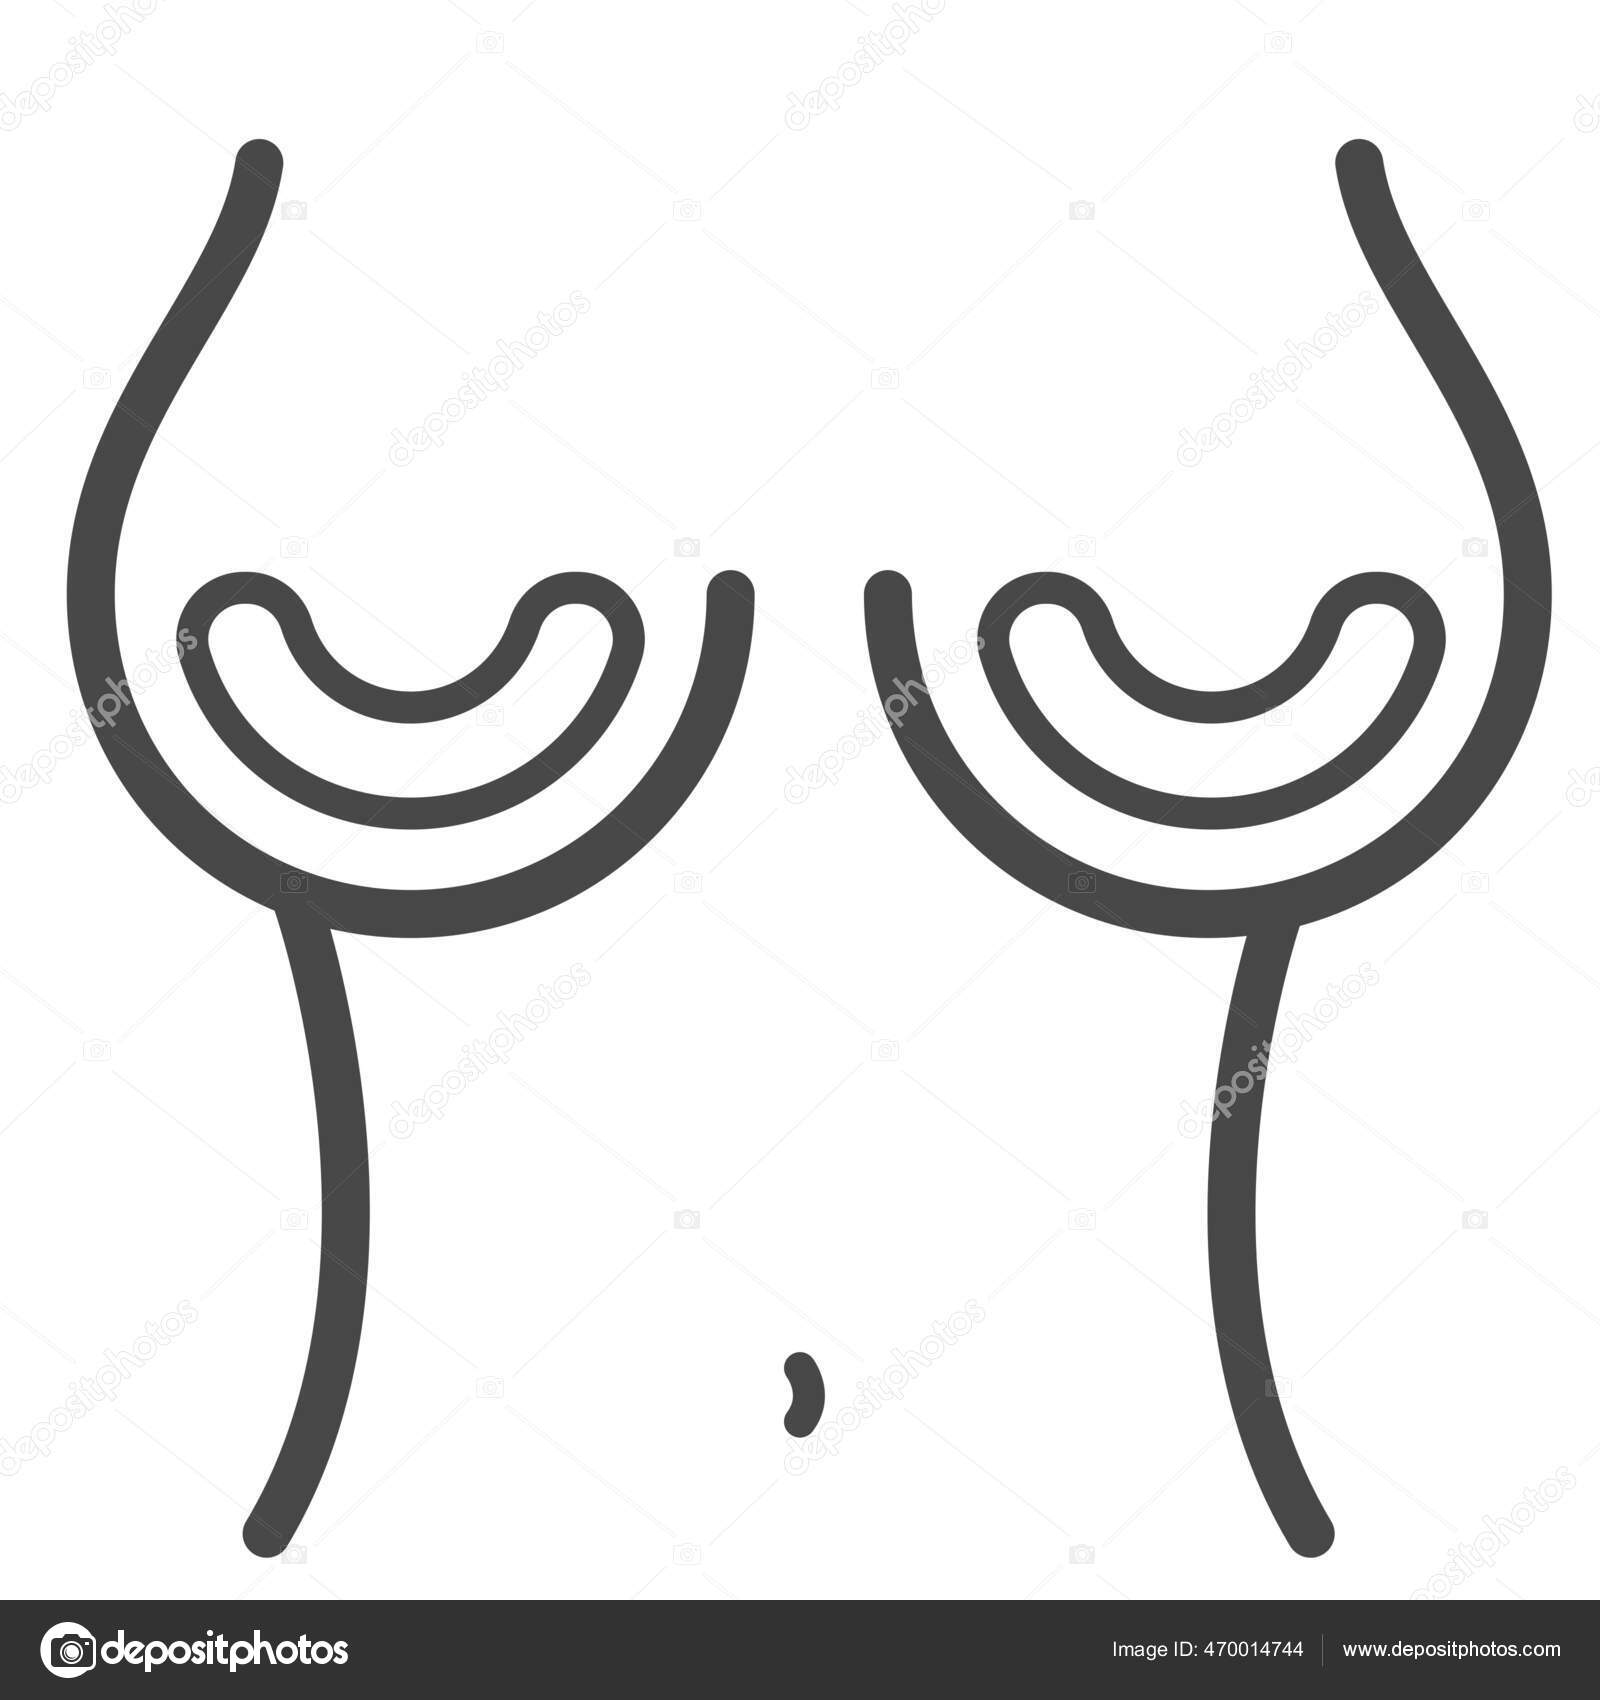 Breast, canser, boobs, breasts icon - Download on Iconfinder